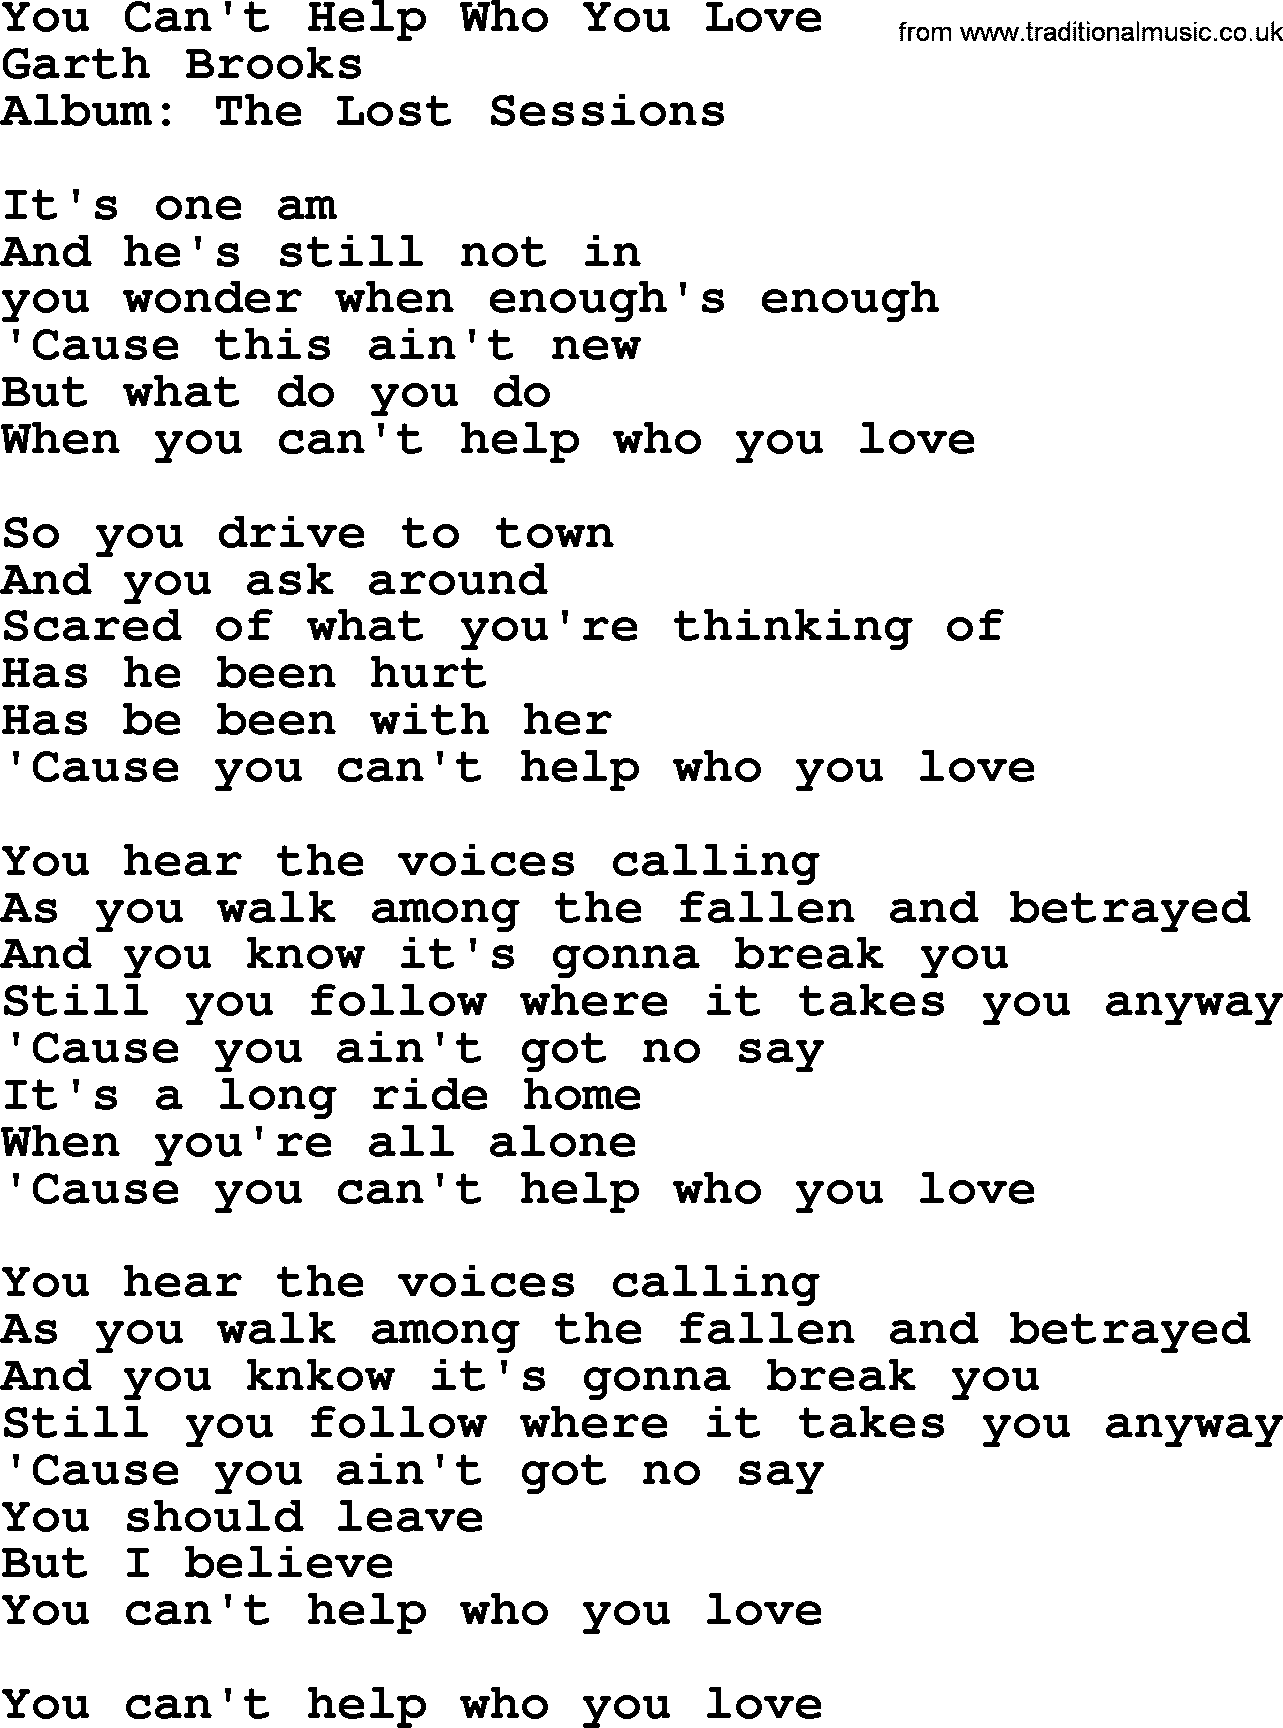 Garth Brooks song: You Can't Help Who You Love, lyrics